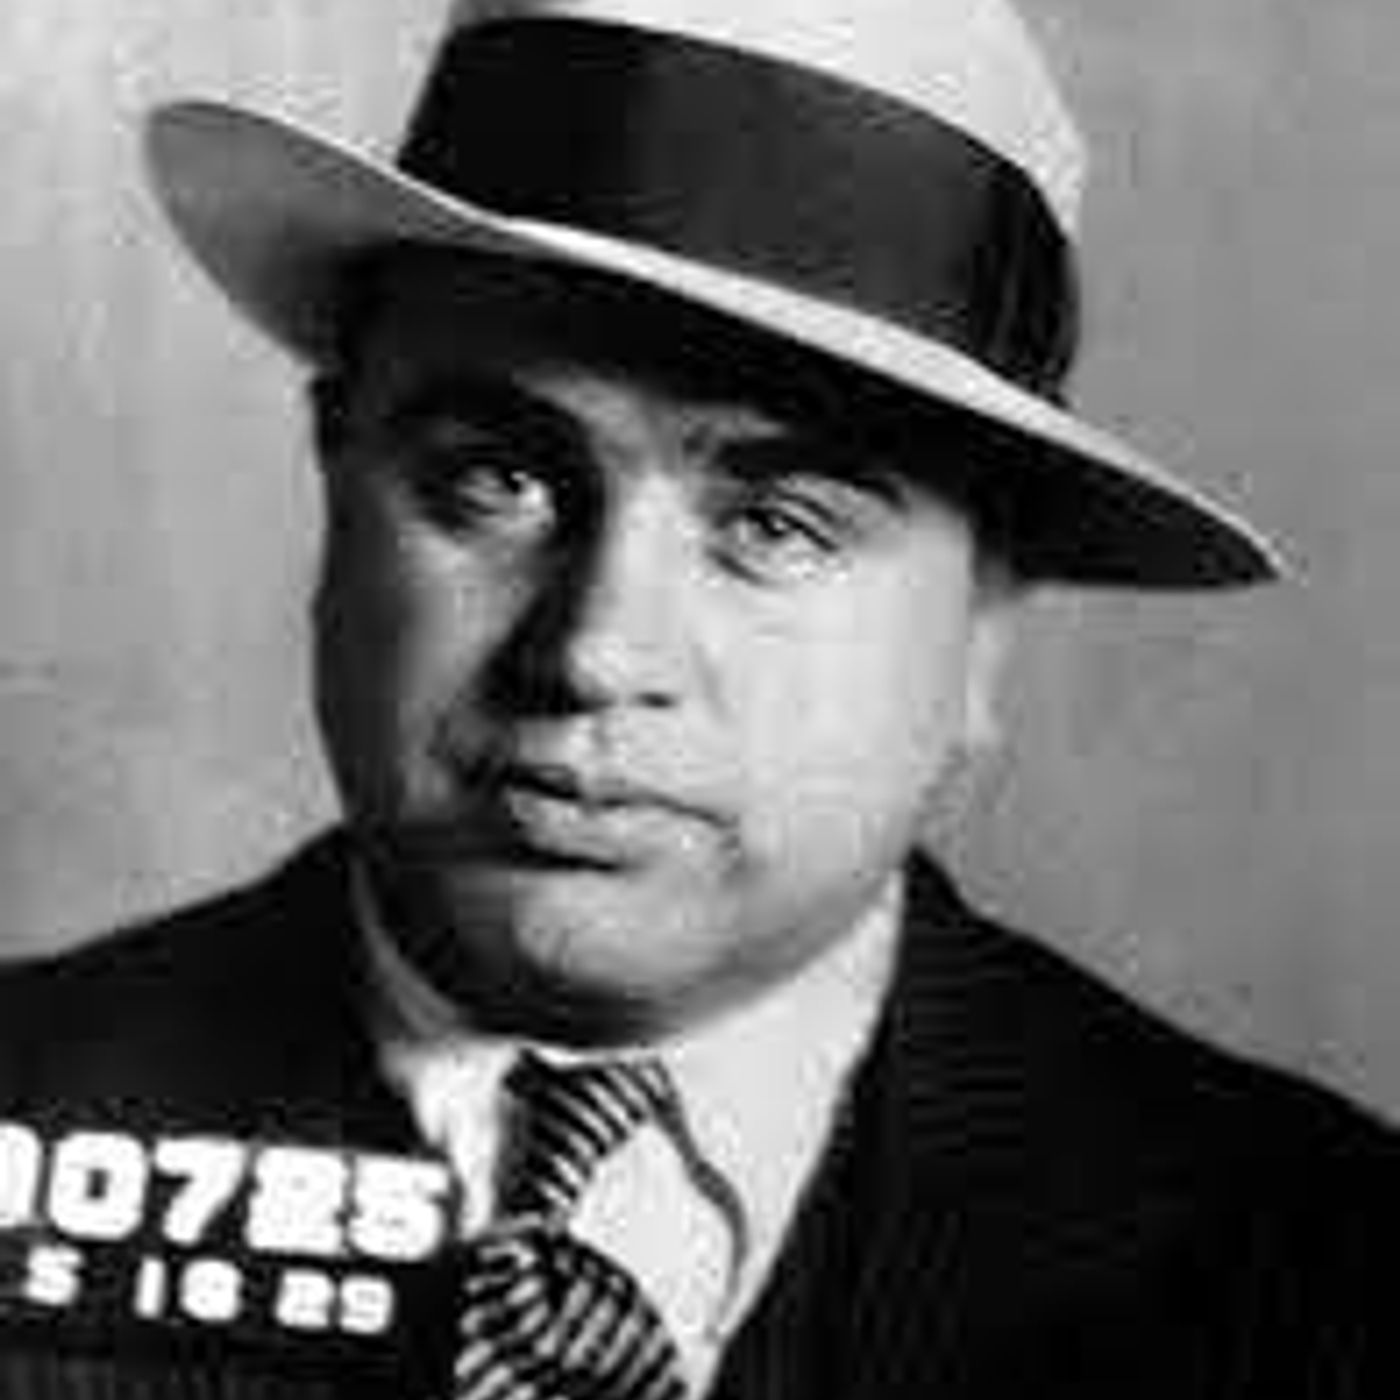 Part 1 of 3 - Al 'Scarface' Capone